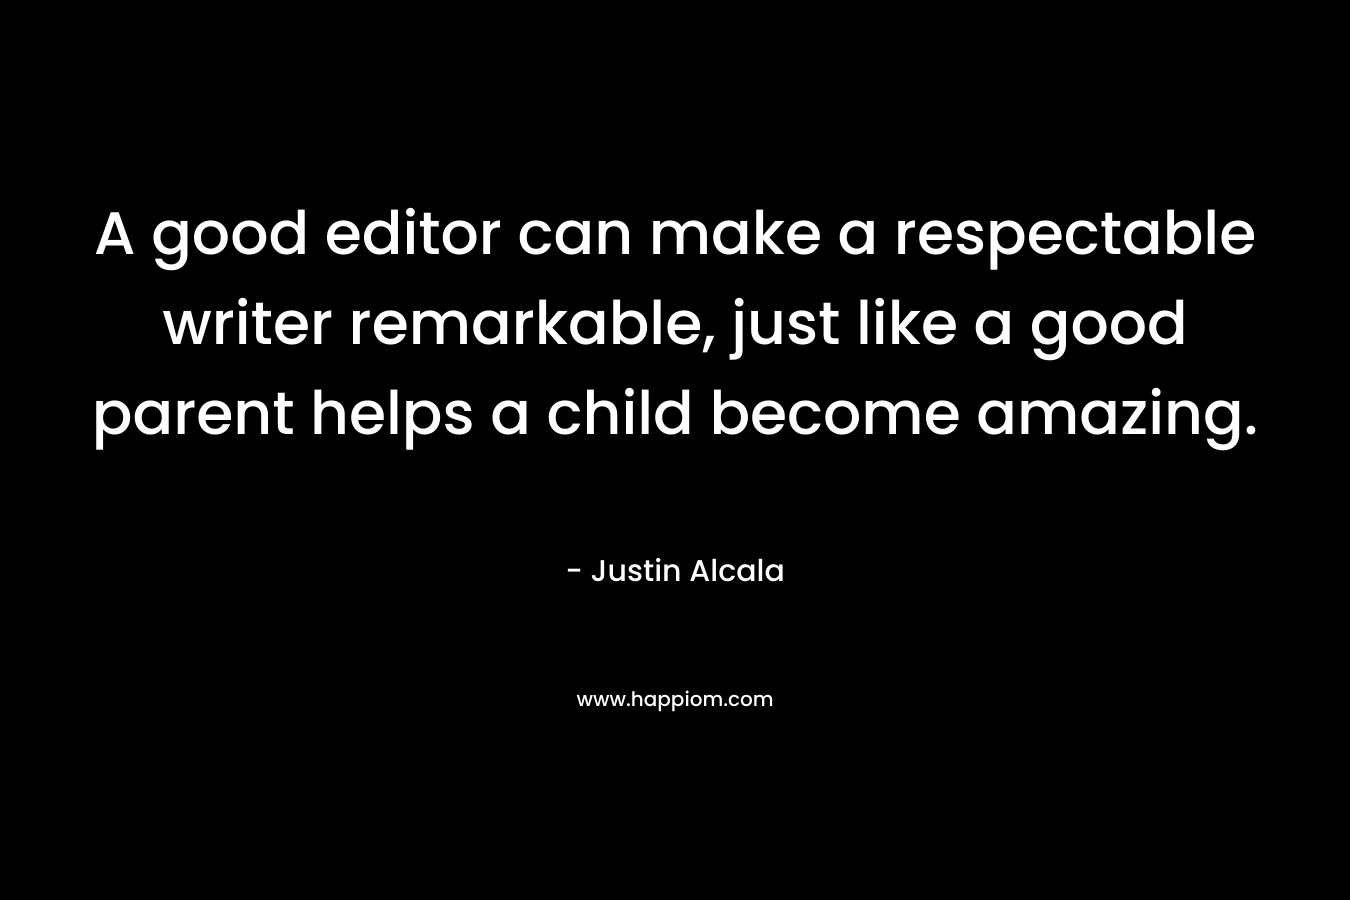 A good editor can make a respectable writer remarkable, just like a good parent helps a child become amazing. – Justin Alcala